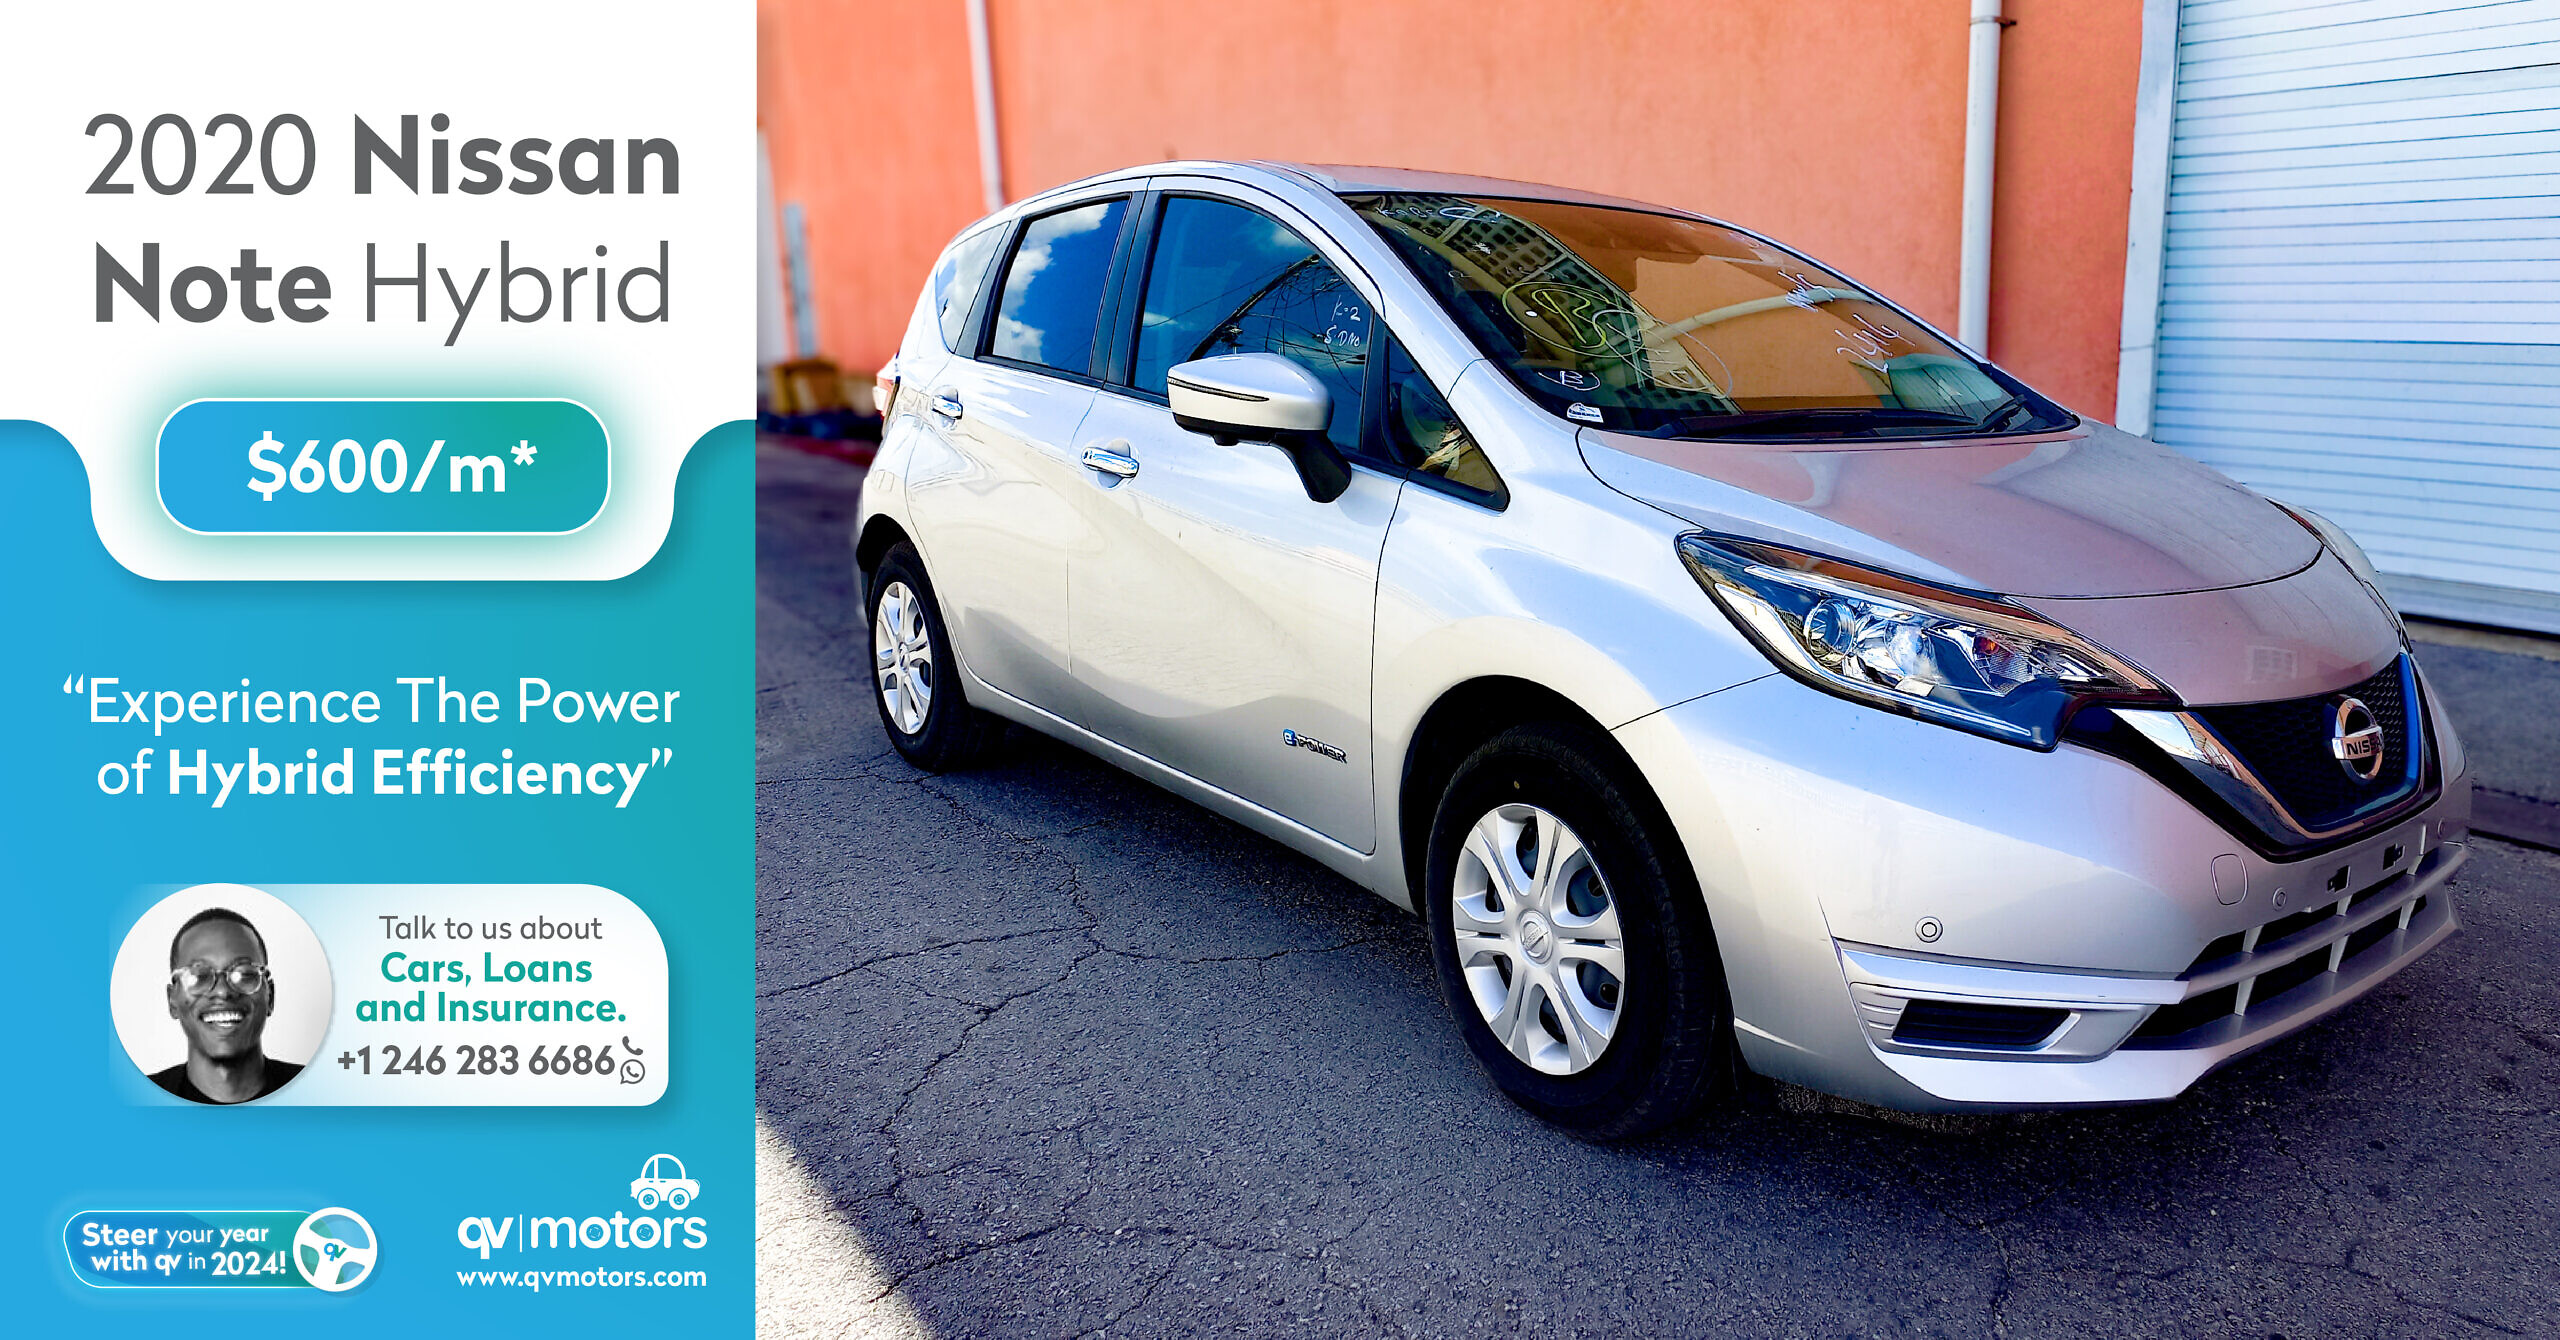 2020 Nissan Note Hybrid – Save up to 50% on Gas!